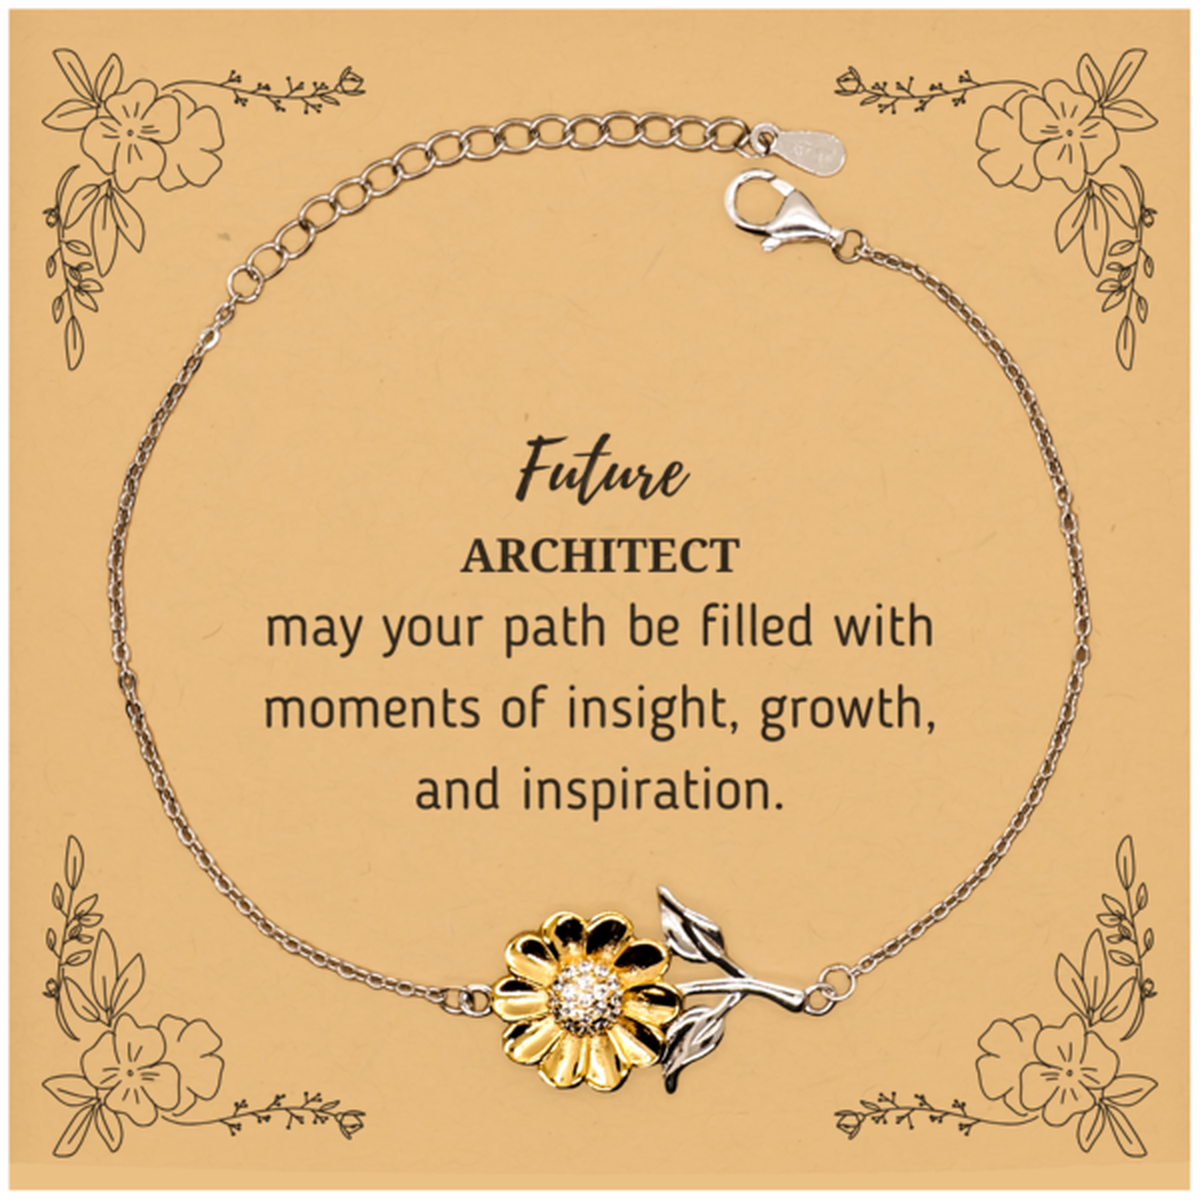 Future Architect Gifts, May your path be filled with moments of insight, Graduation Gifts for New Architect, Christmas Unique Sunflower Bracelet For Men, Women, Friends